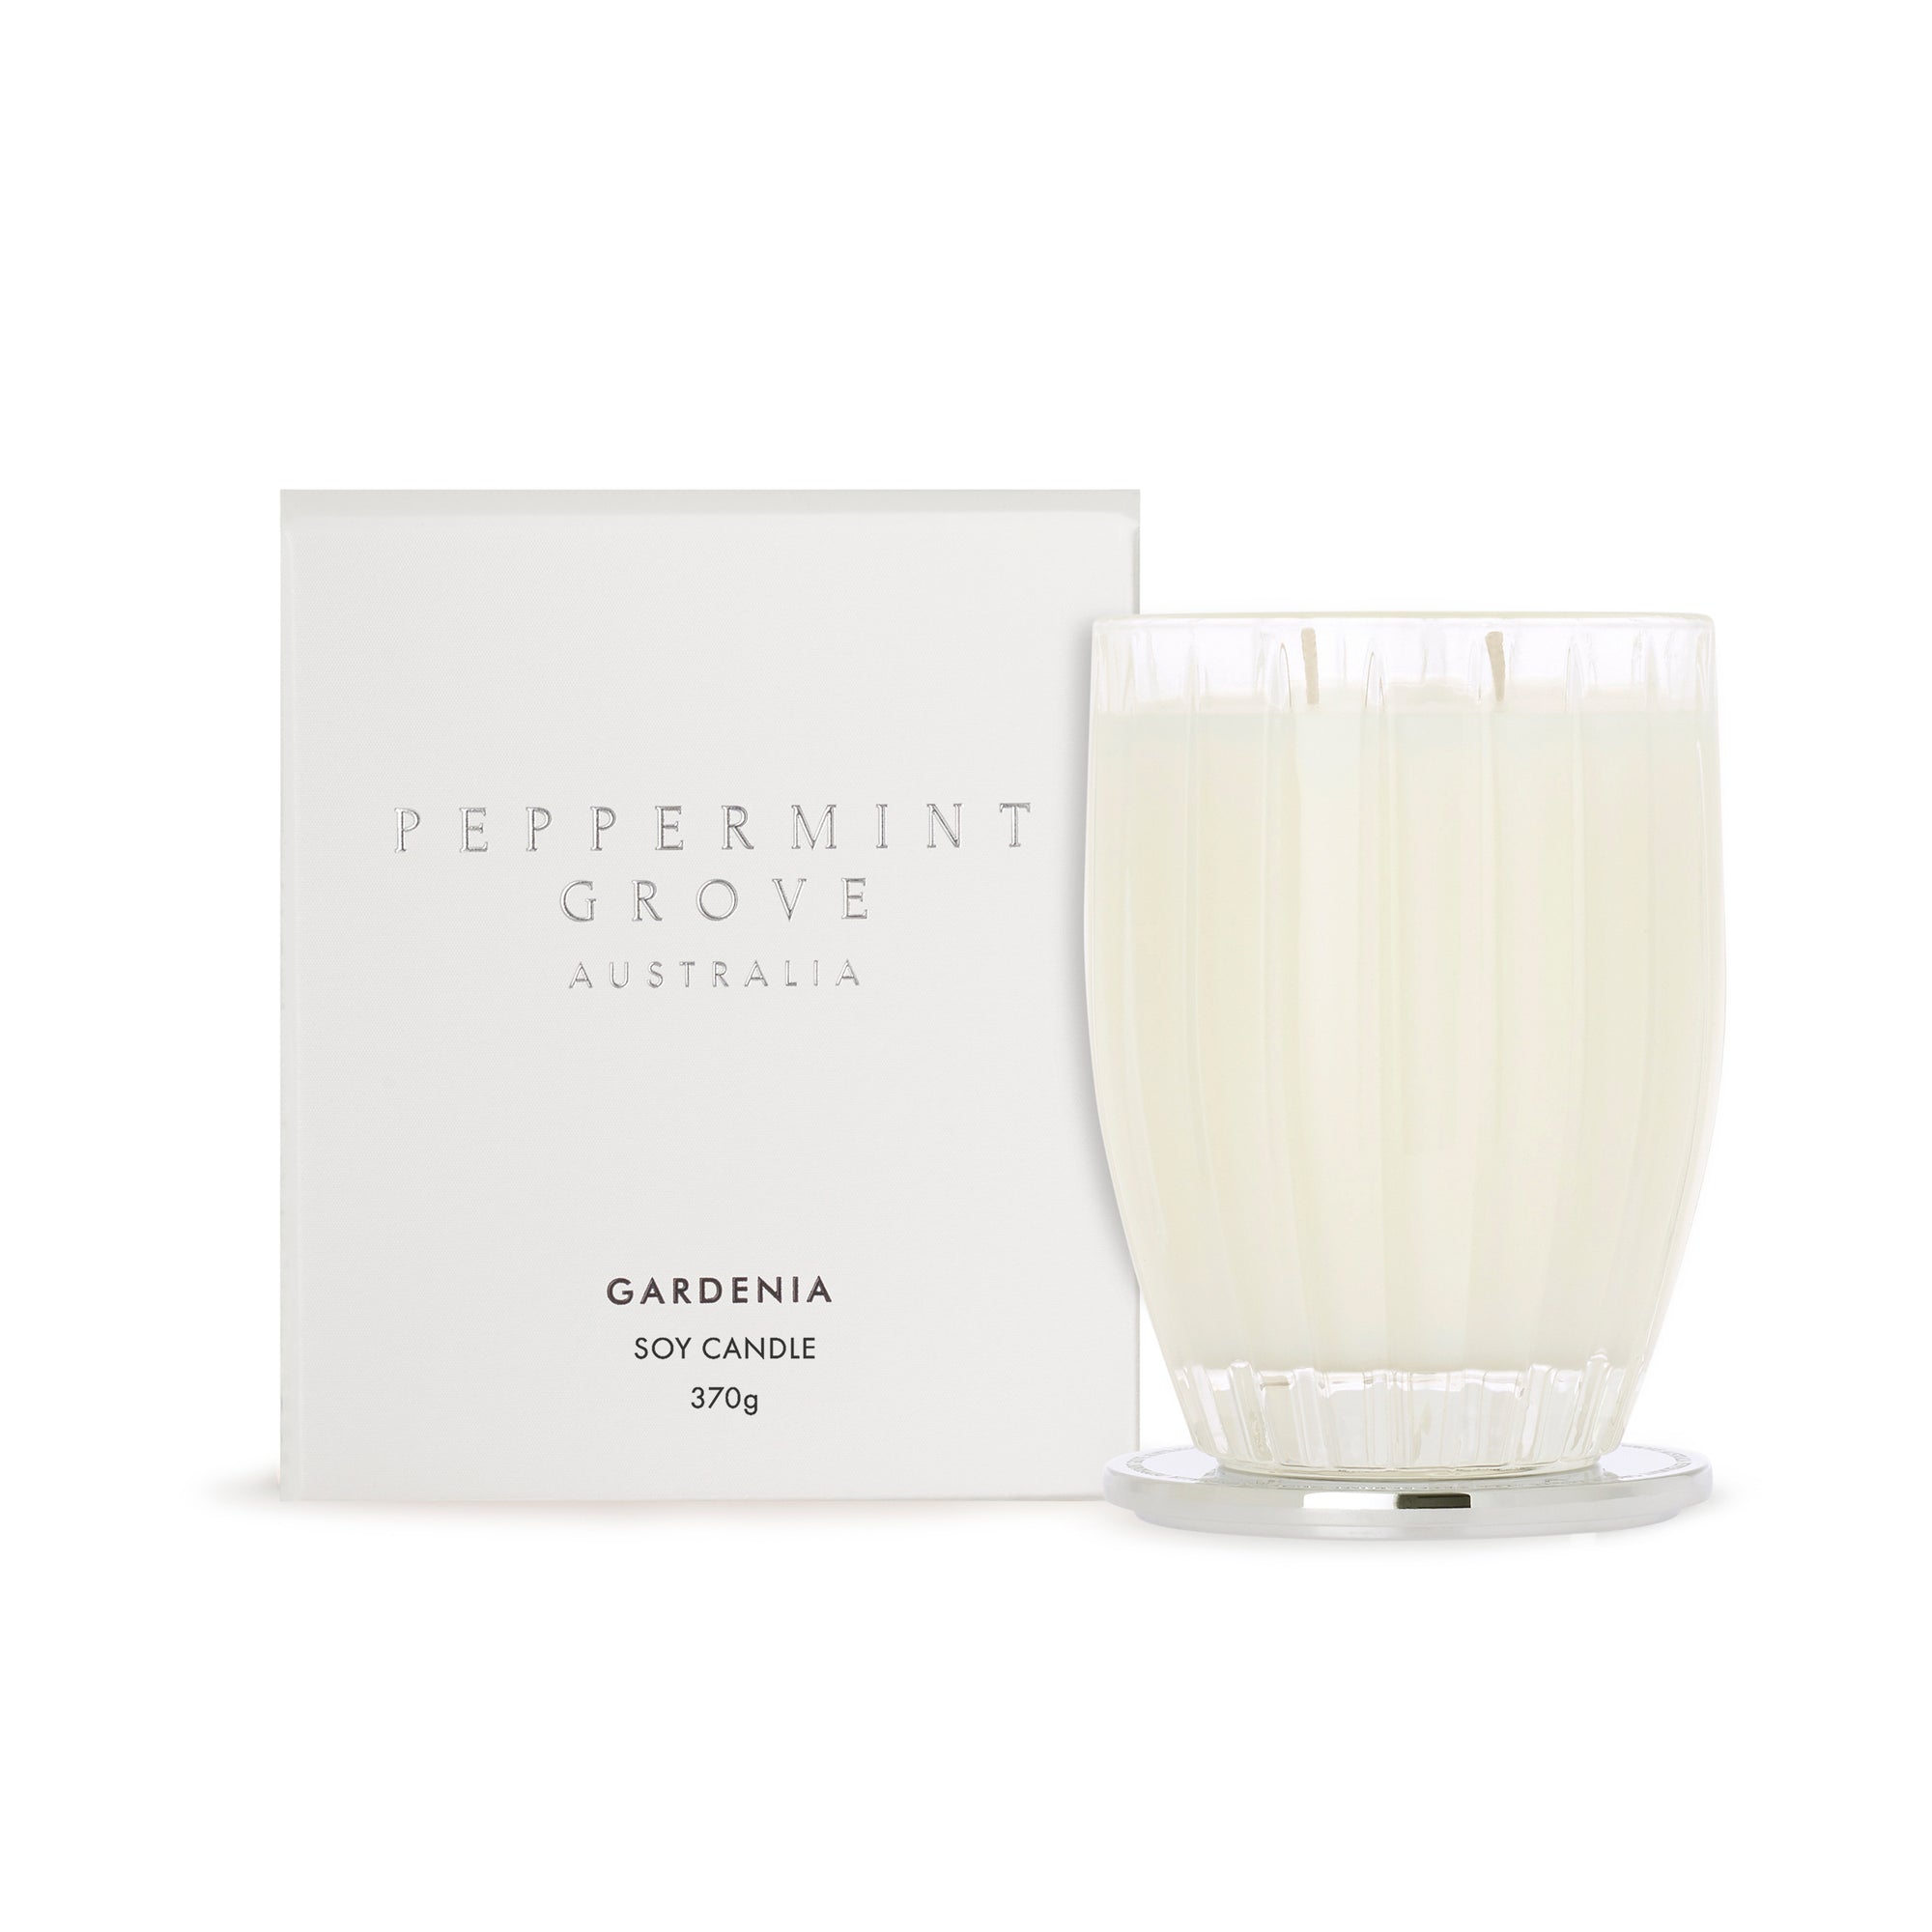 Peppermint Grove Gardenia Large Soy Candle 370g